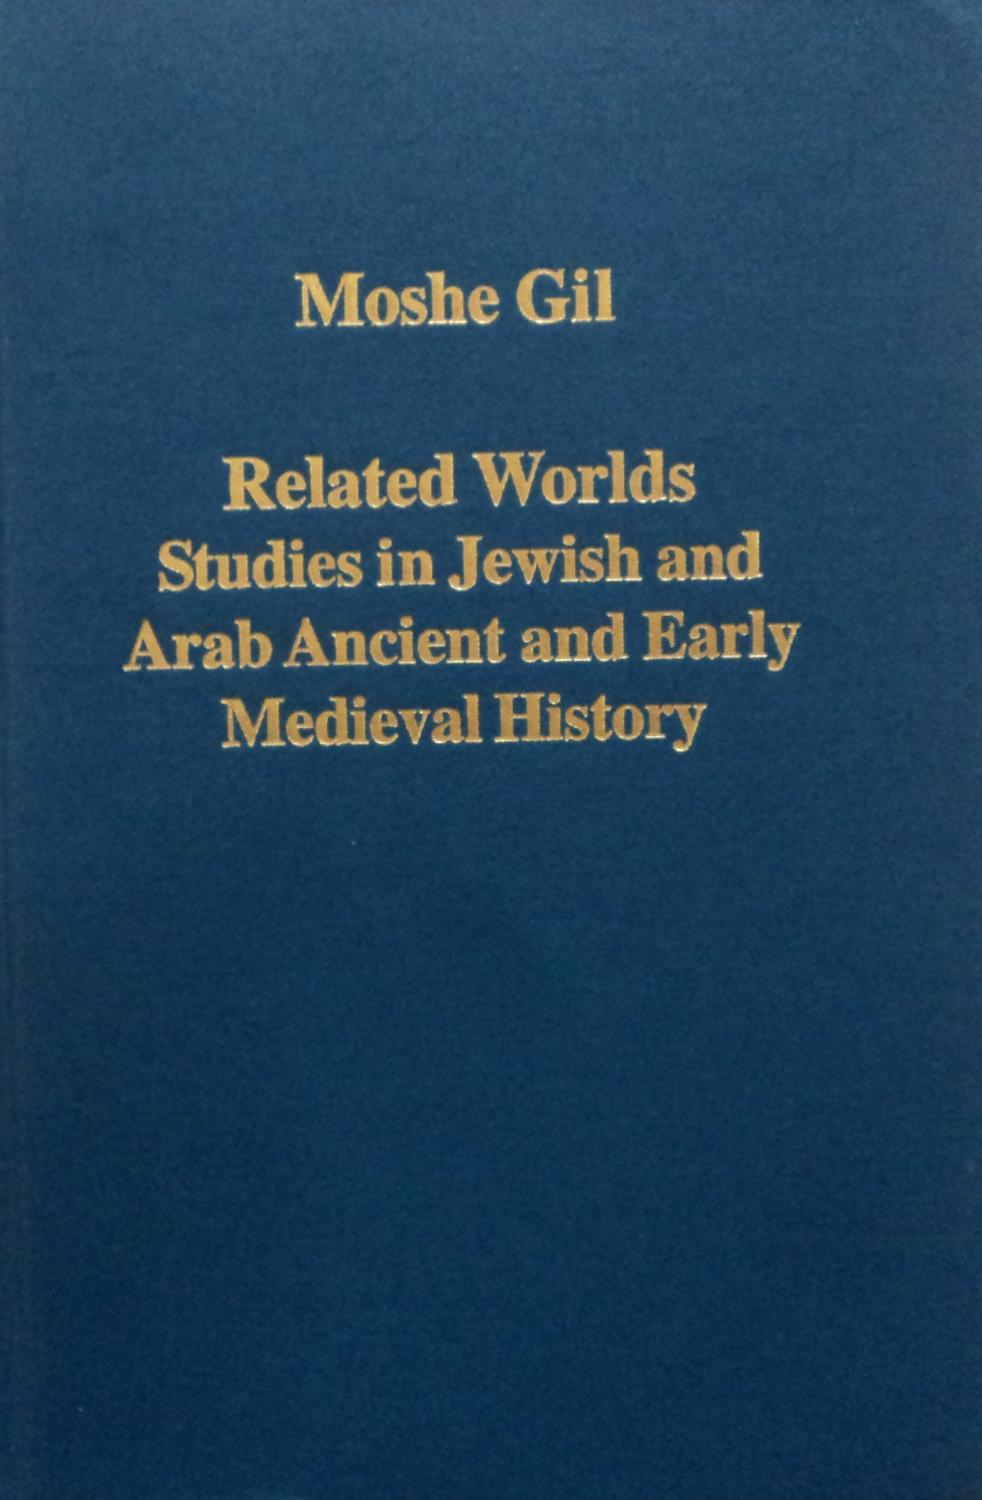 Related Worlds: Studies in Jewish and Arab Ancient and Early Medieval History (Variorum Collected Studies) - Gil, Moshe